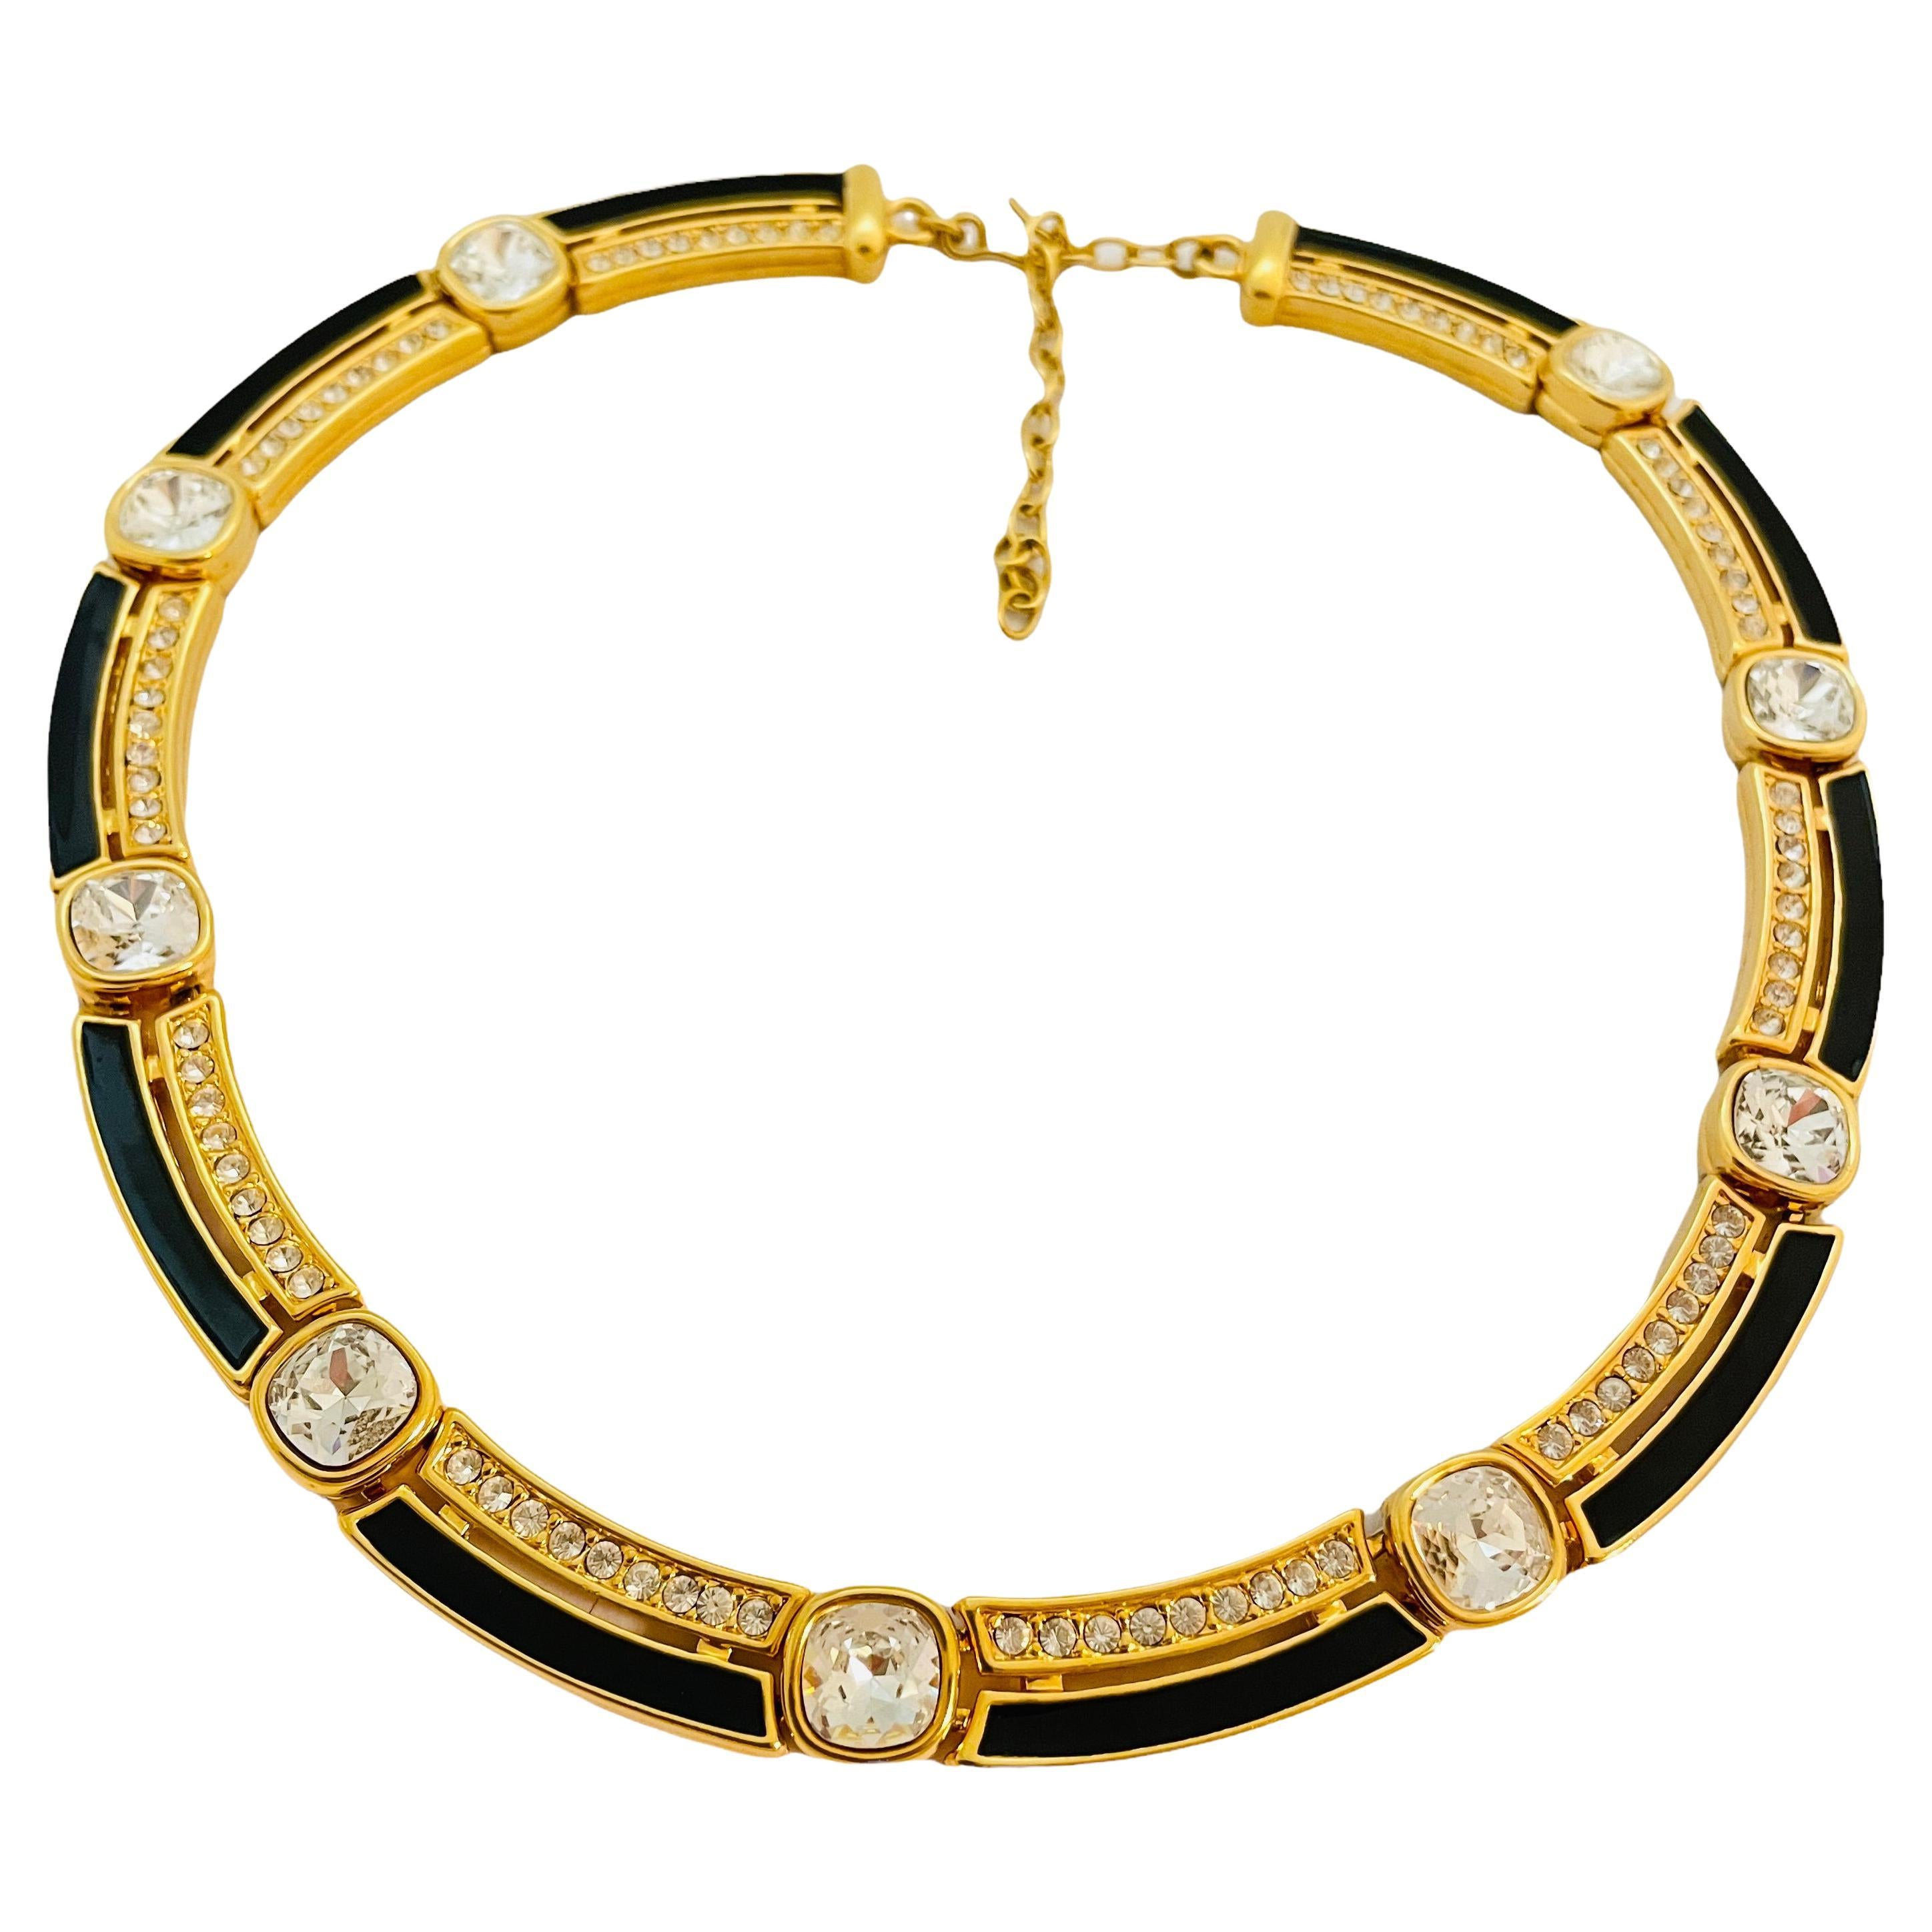 Is Monet jewelry real gold?